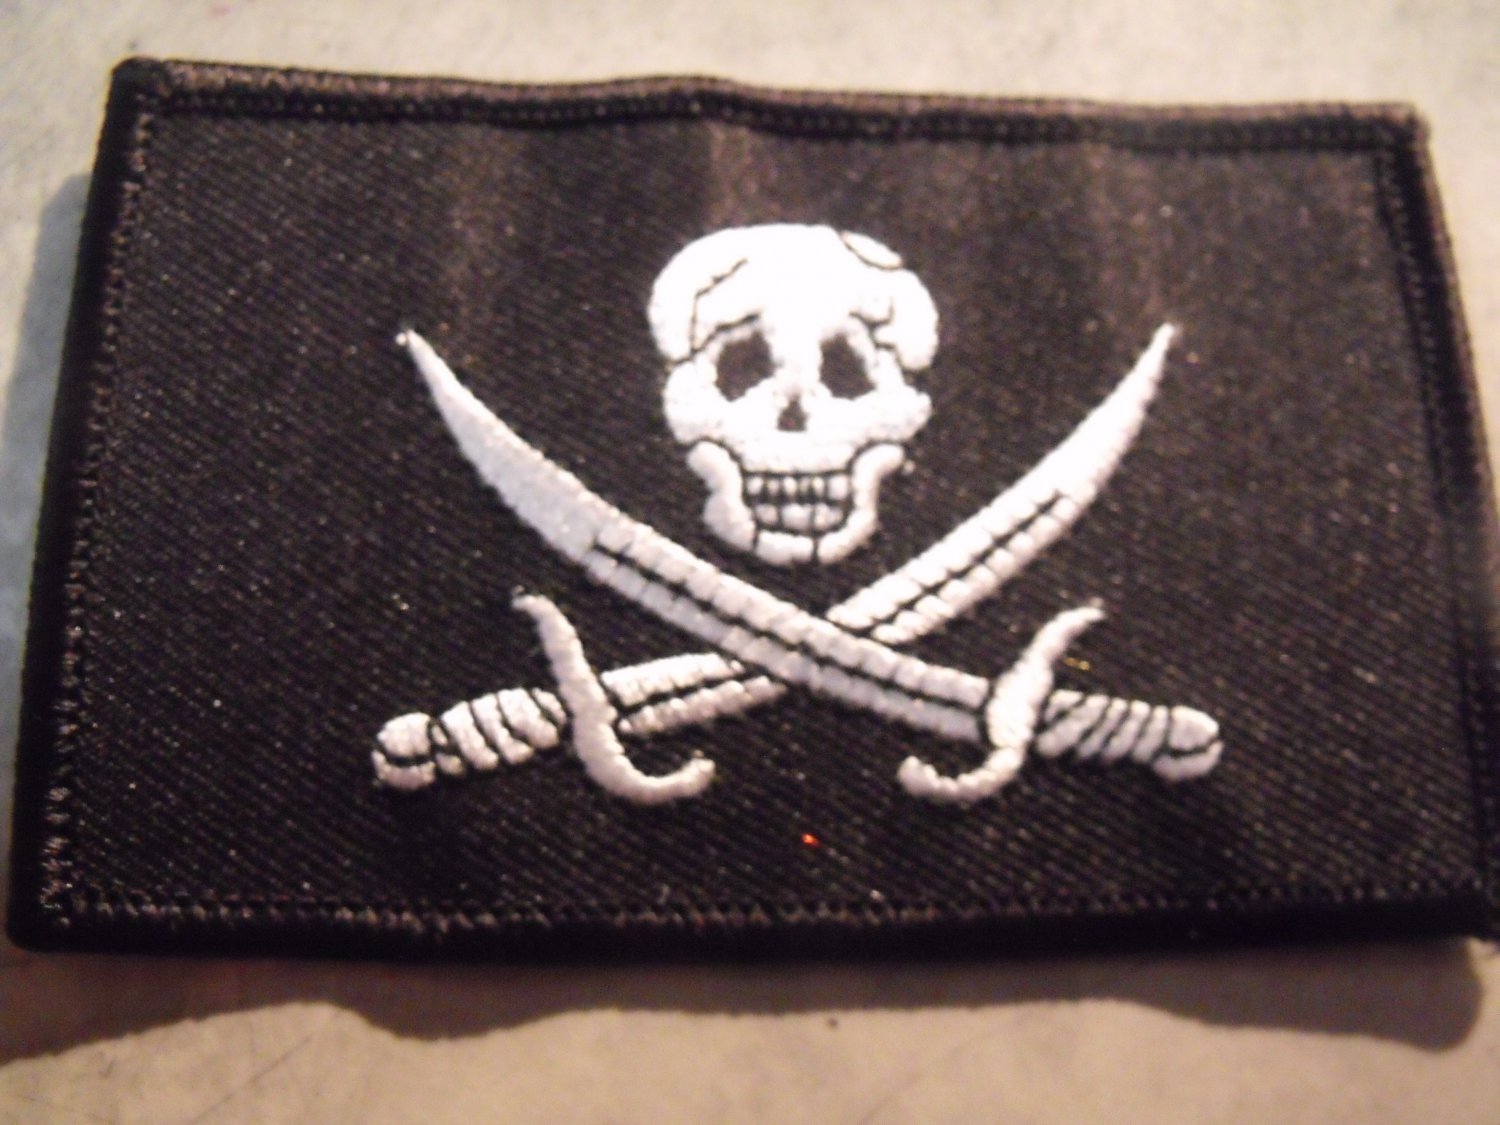 Calico Jack Jolly Roger Pirate Flag Embroidered Patch 3.5"x2.25"